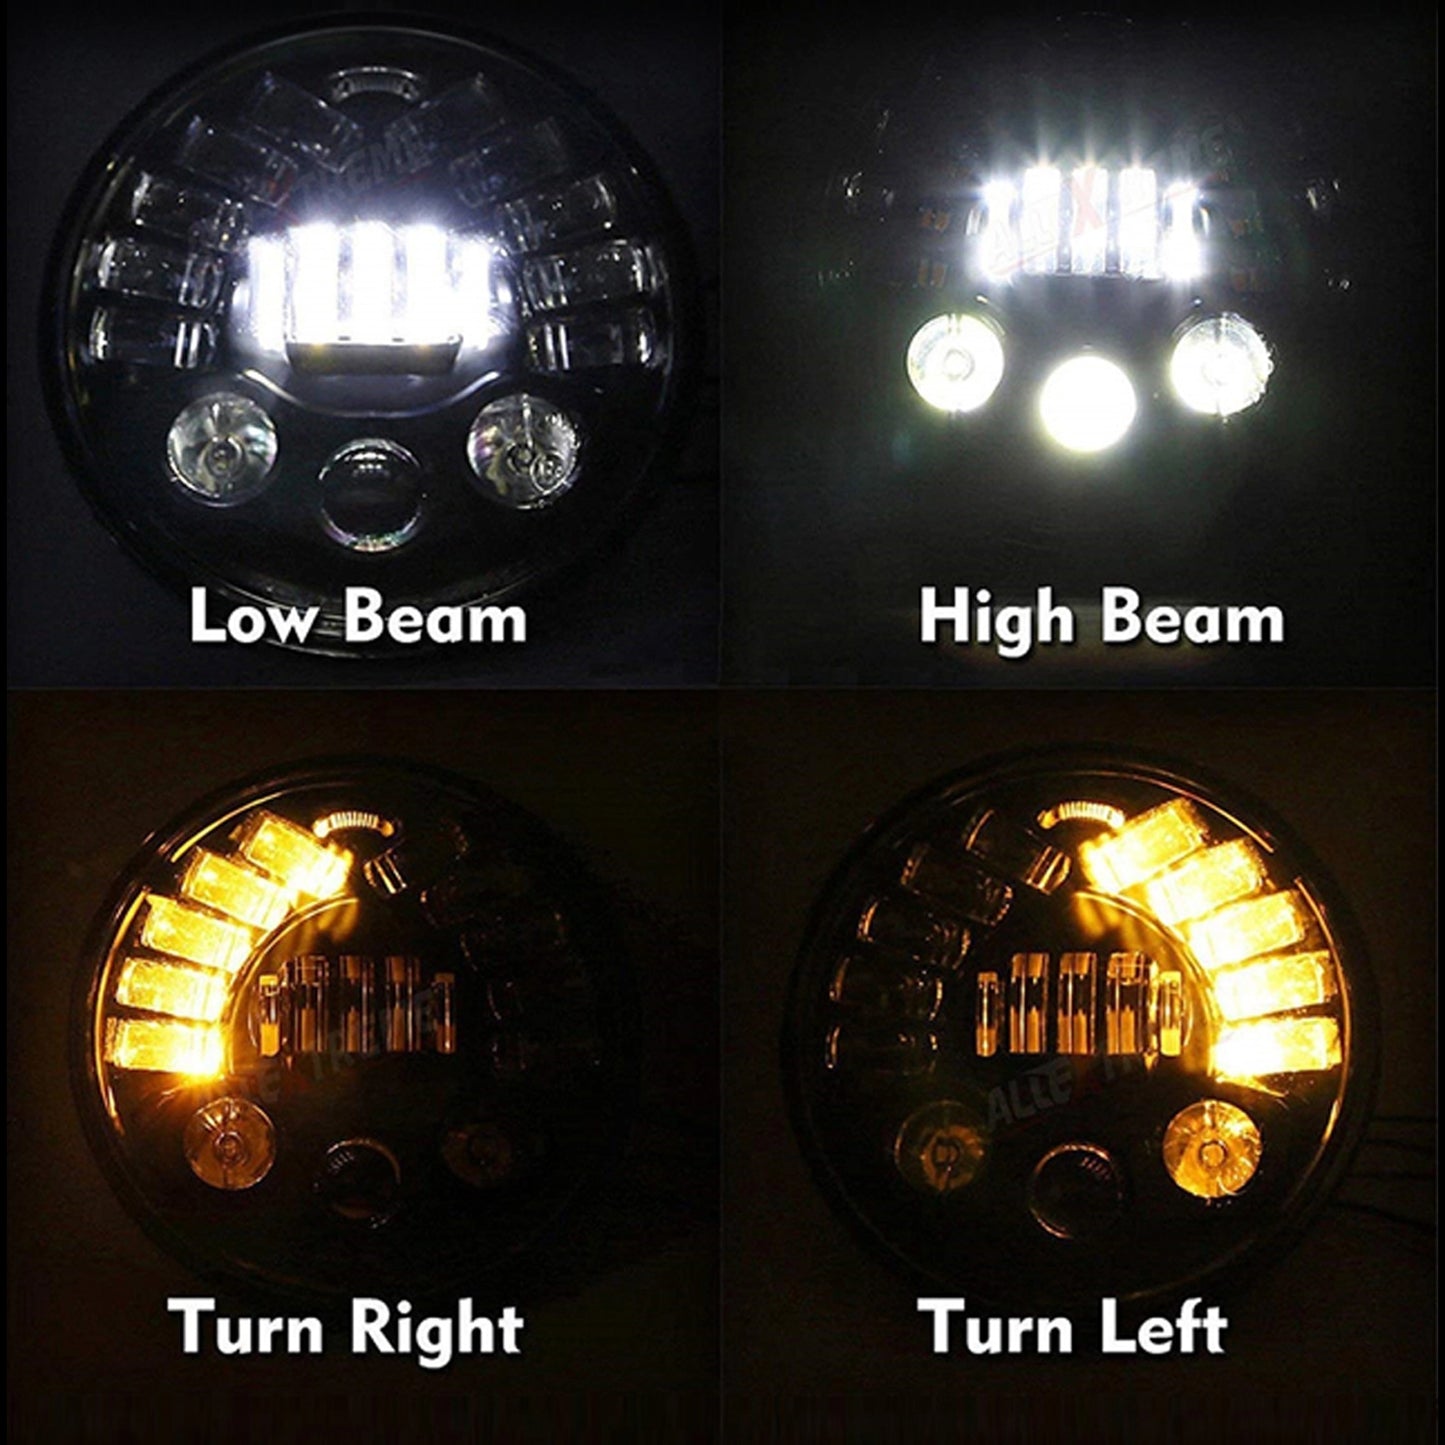 7 Inch Round Headlight with Turn Signal Indicator & Hi/Low Beam for Bullet, Mahindra Thar - bikerstore.in